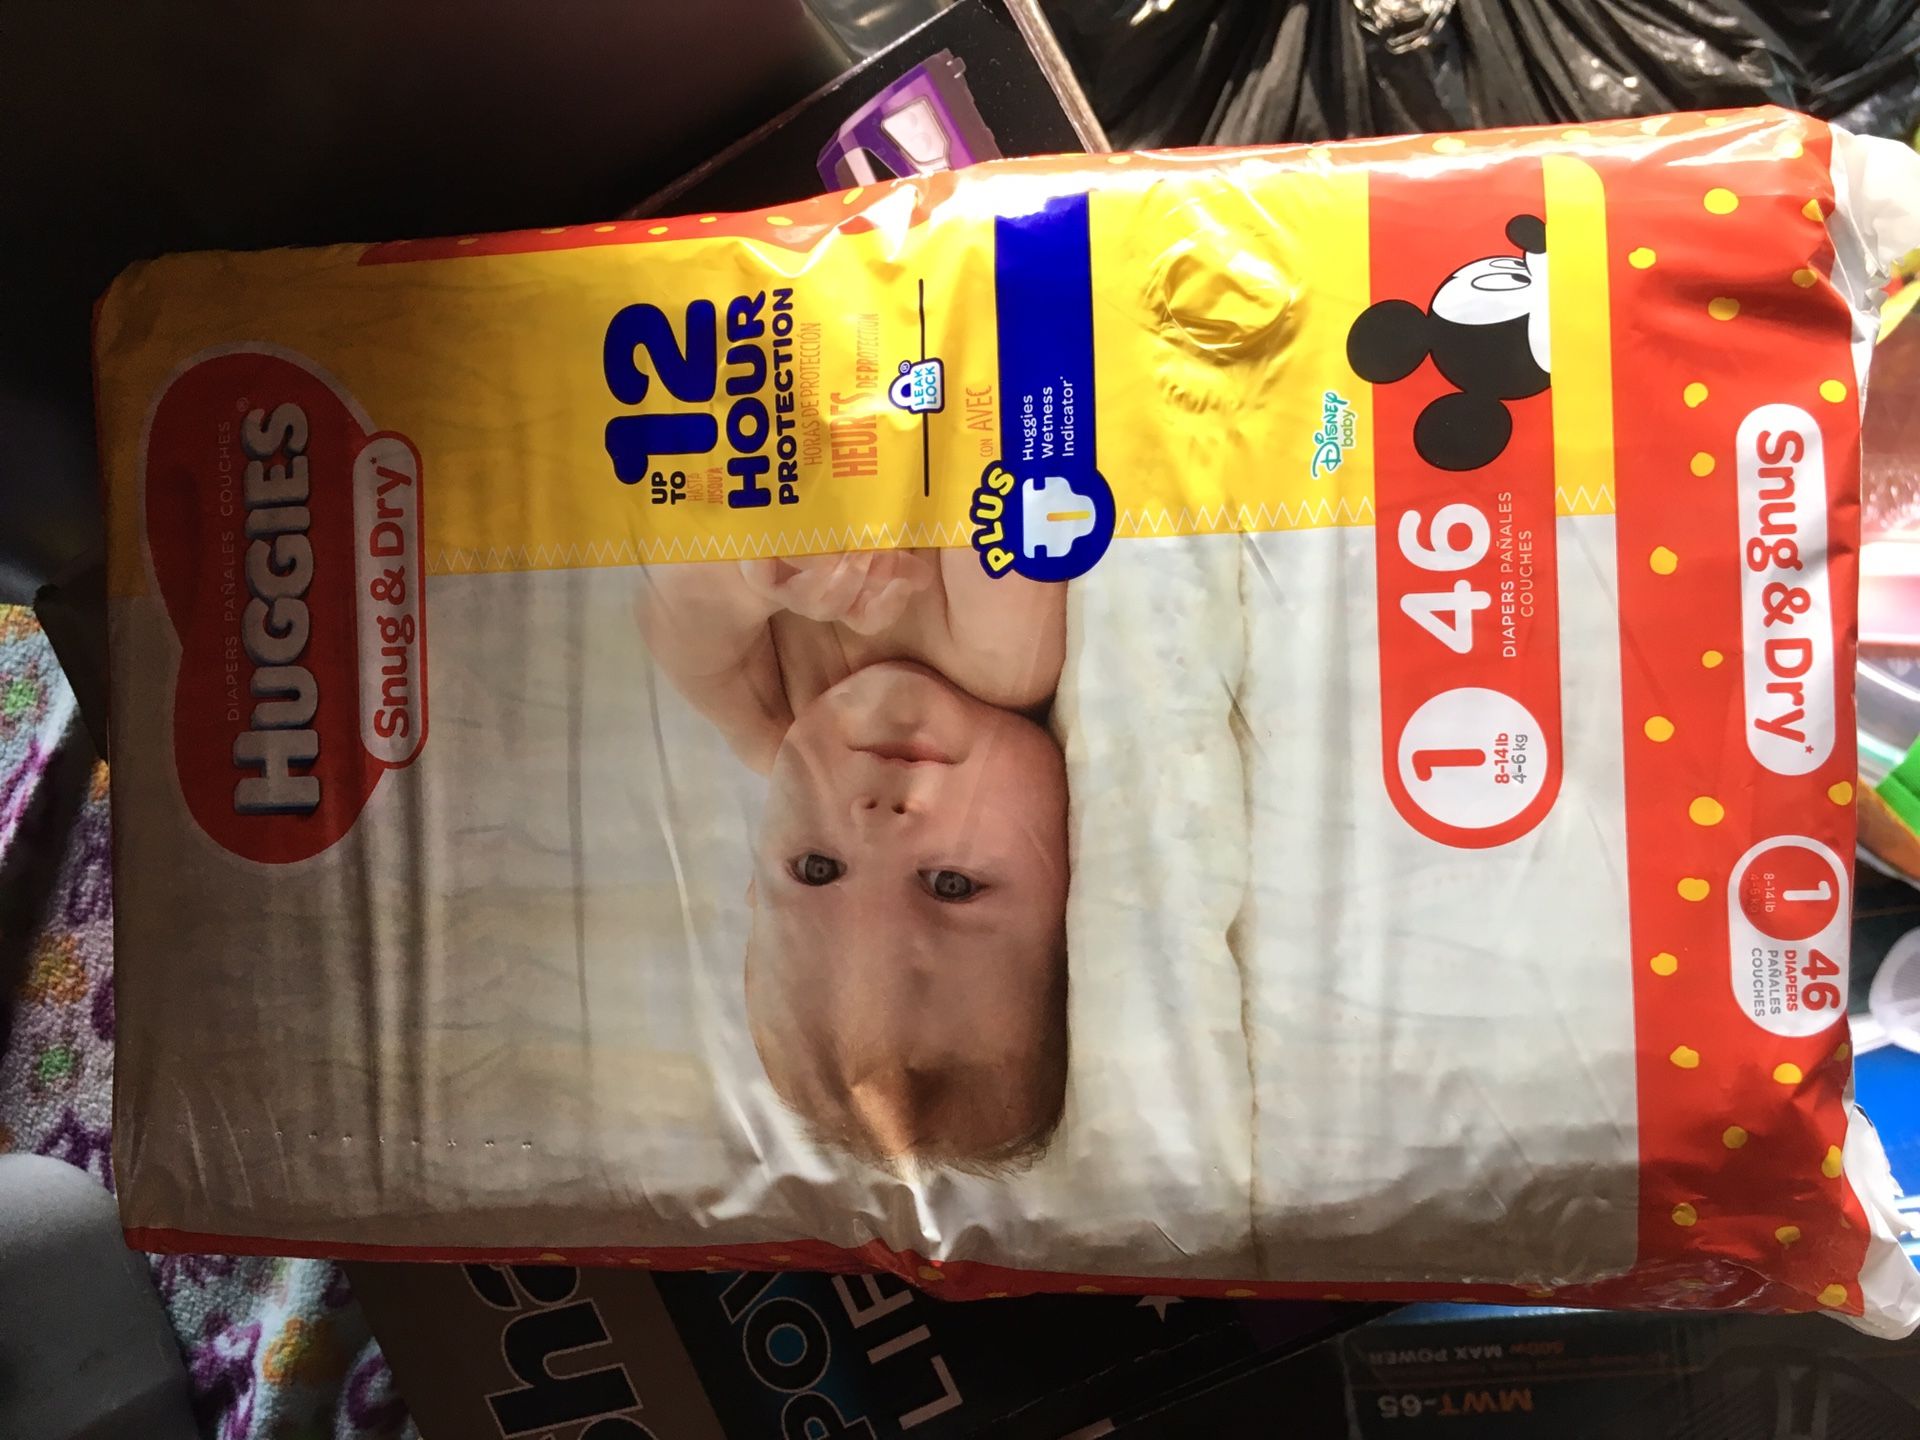 Size 1 diapers